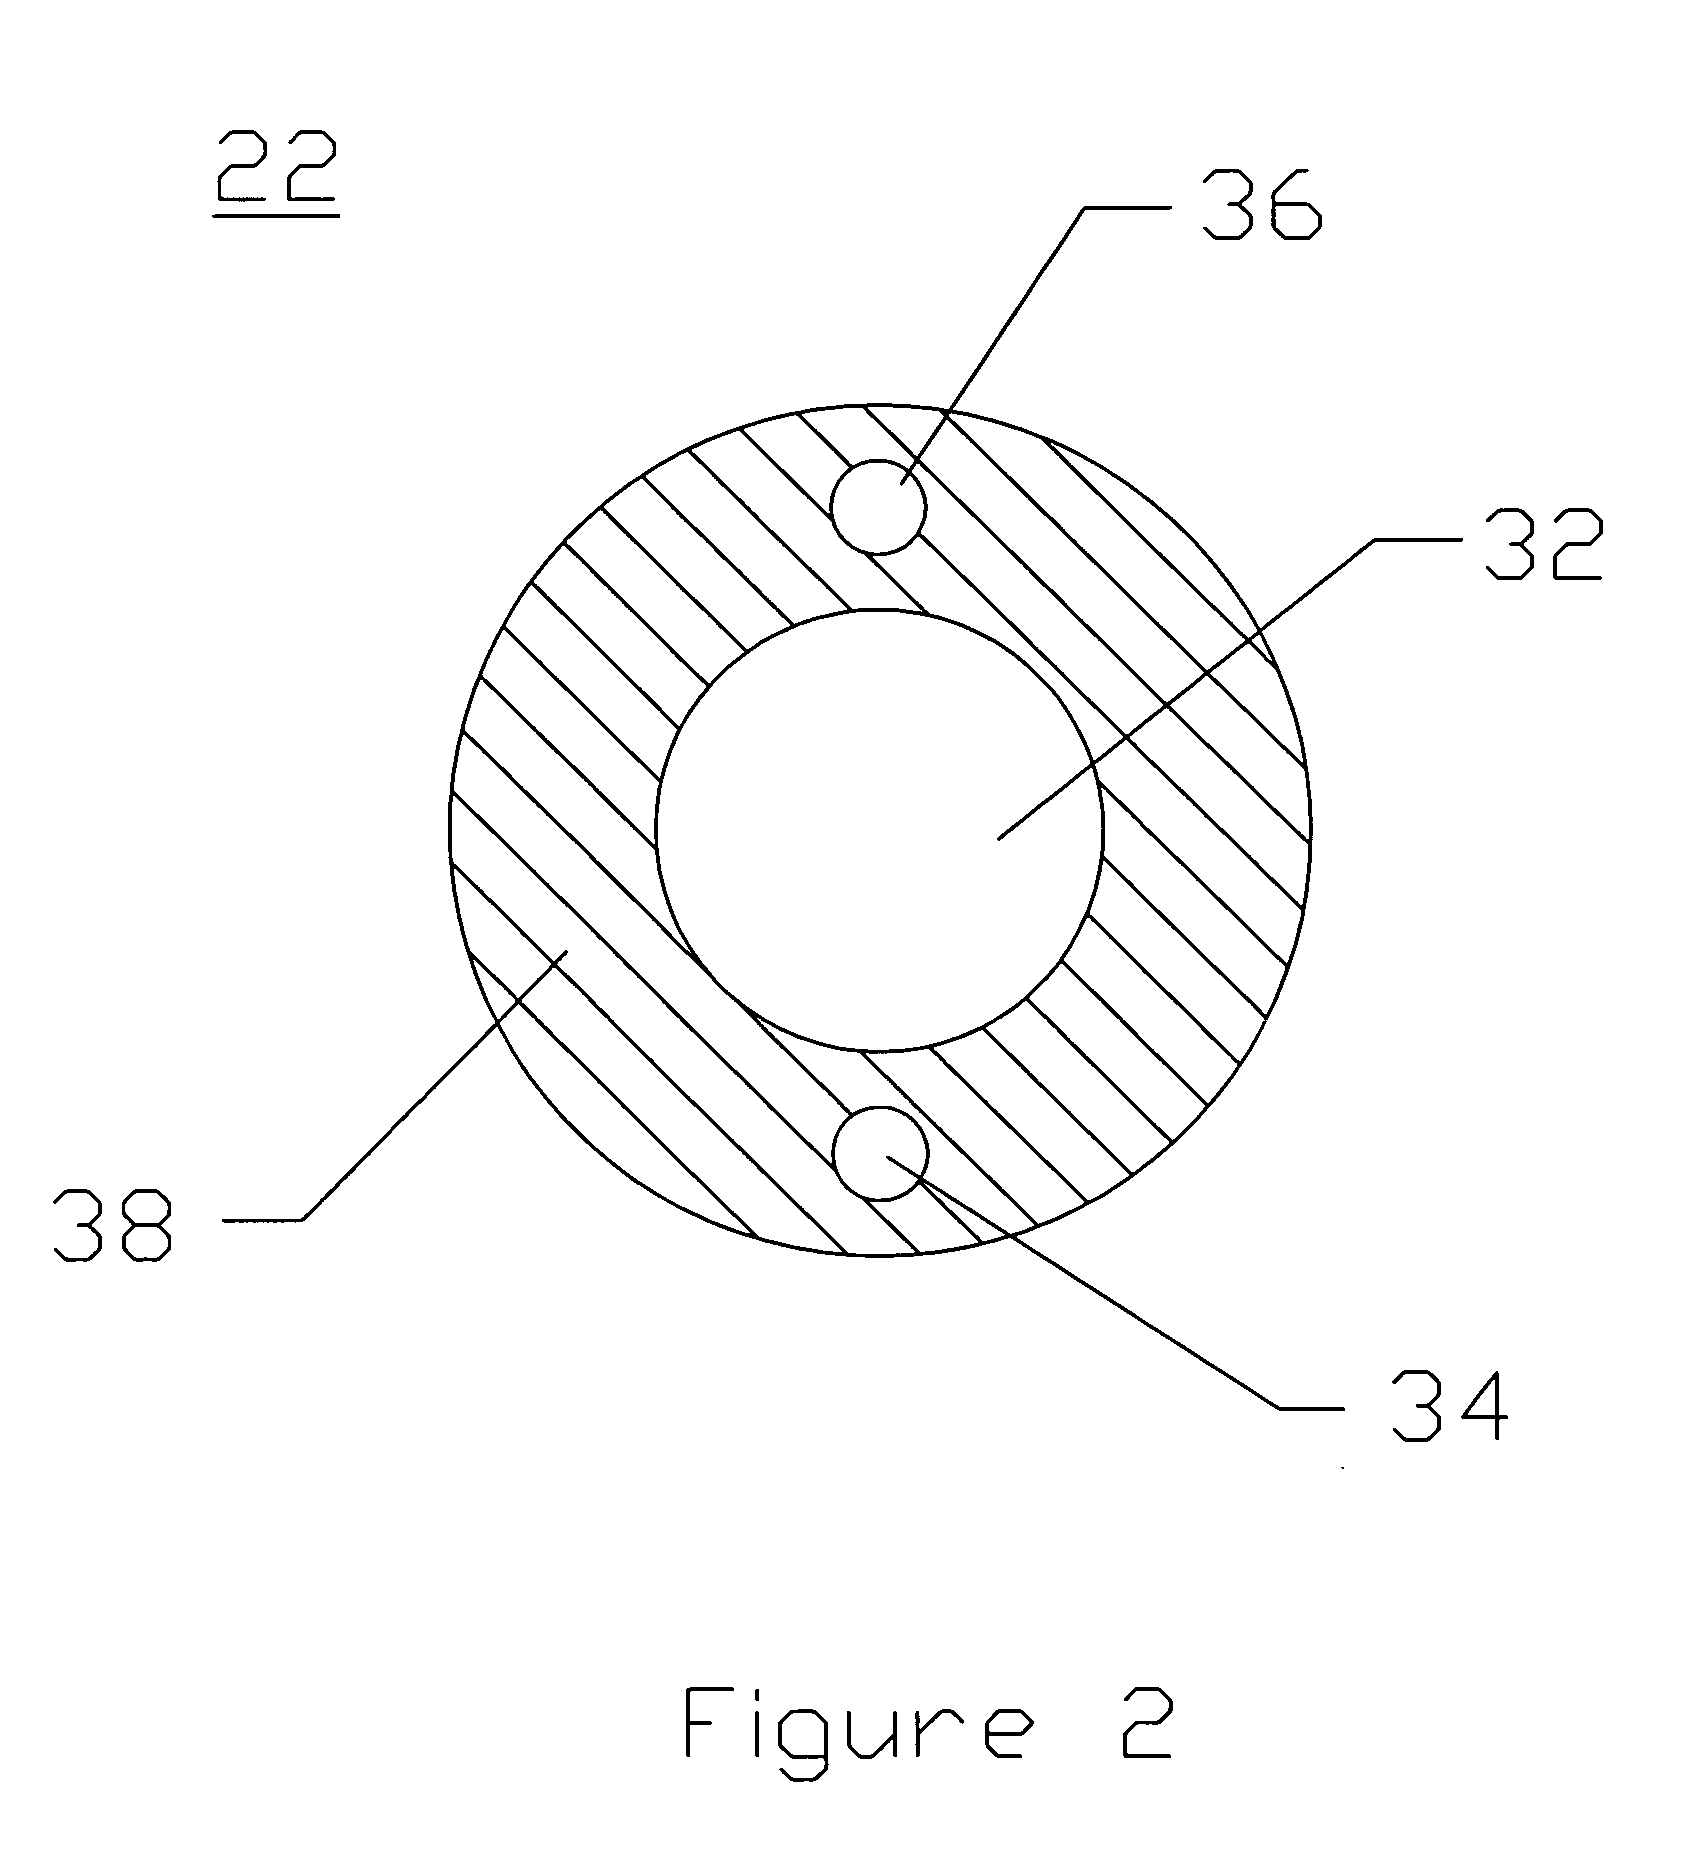 Method and apparatus for chest drainage